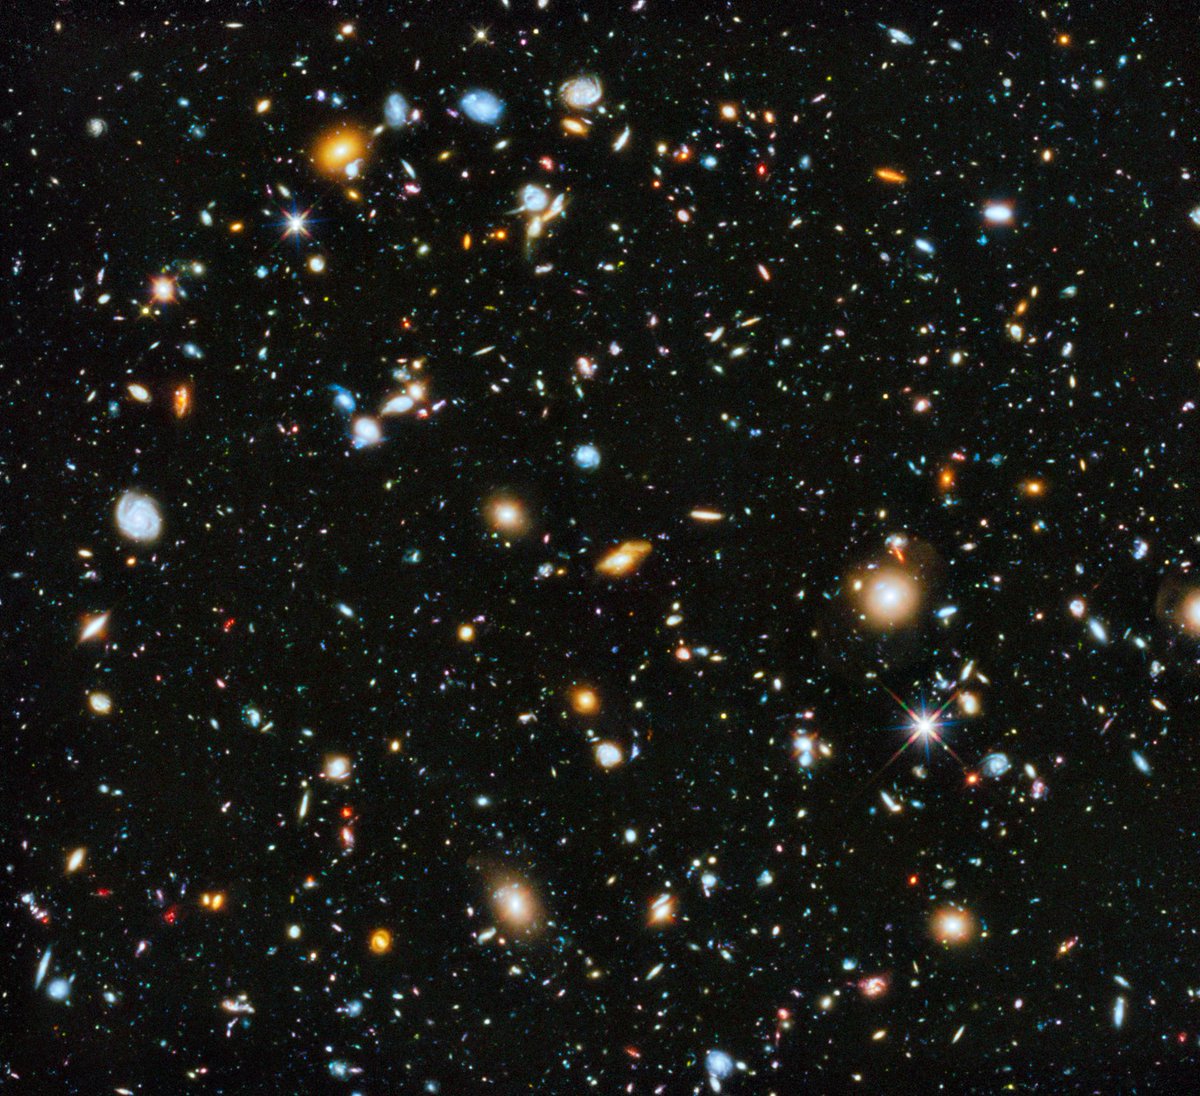 On January 13, 1997, NASA announced that a census of 27 nearby galaxies taken by @NASAHubble & telescopes in Hawaii suggested that nearly all big galaxies harbor a supermassive black hole at their centers. Read the text of the press release: go.nasa.gov/3ULxcxM #BlackHoleWeek